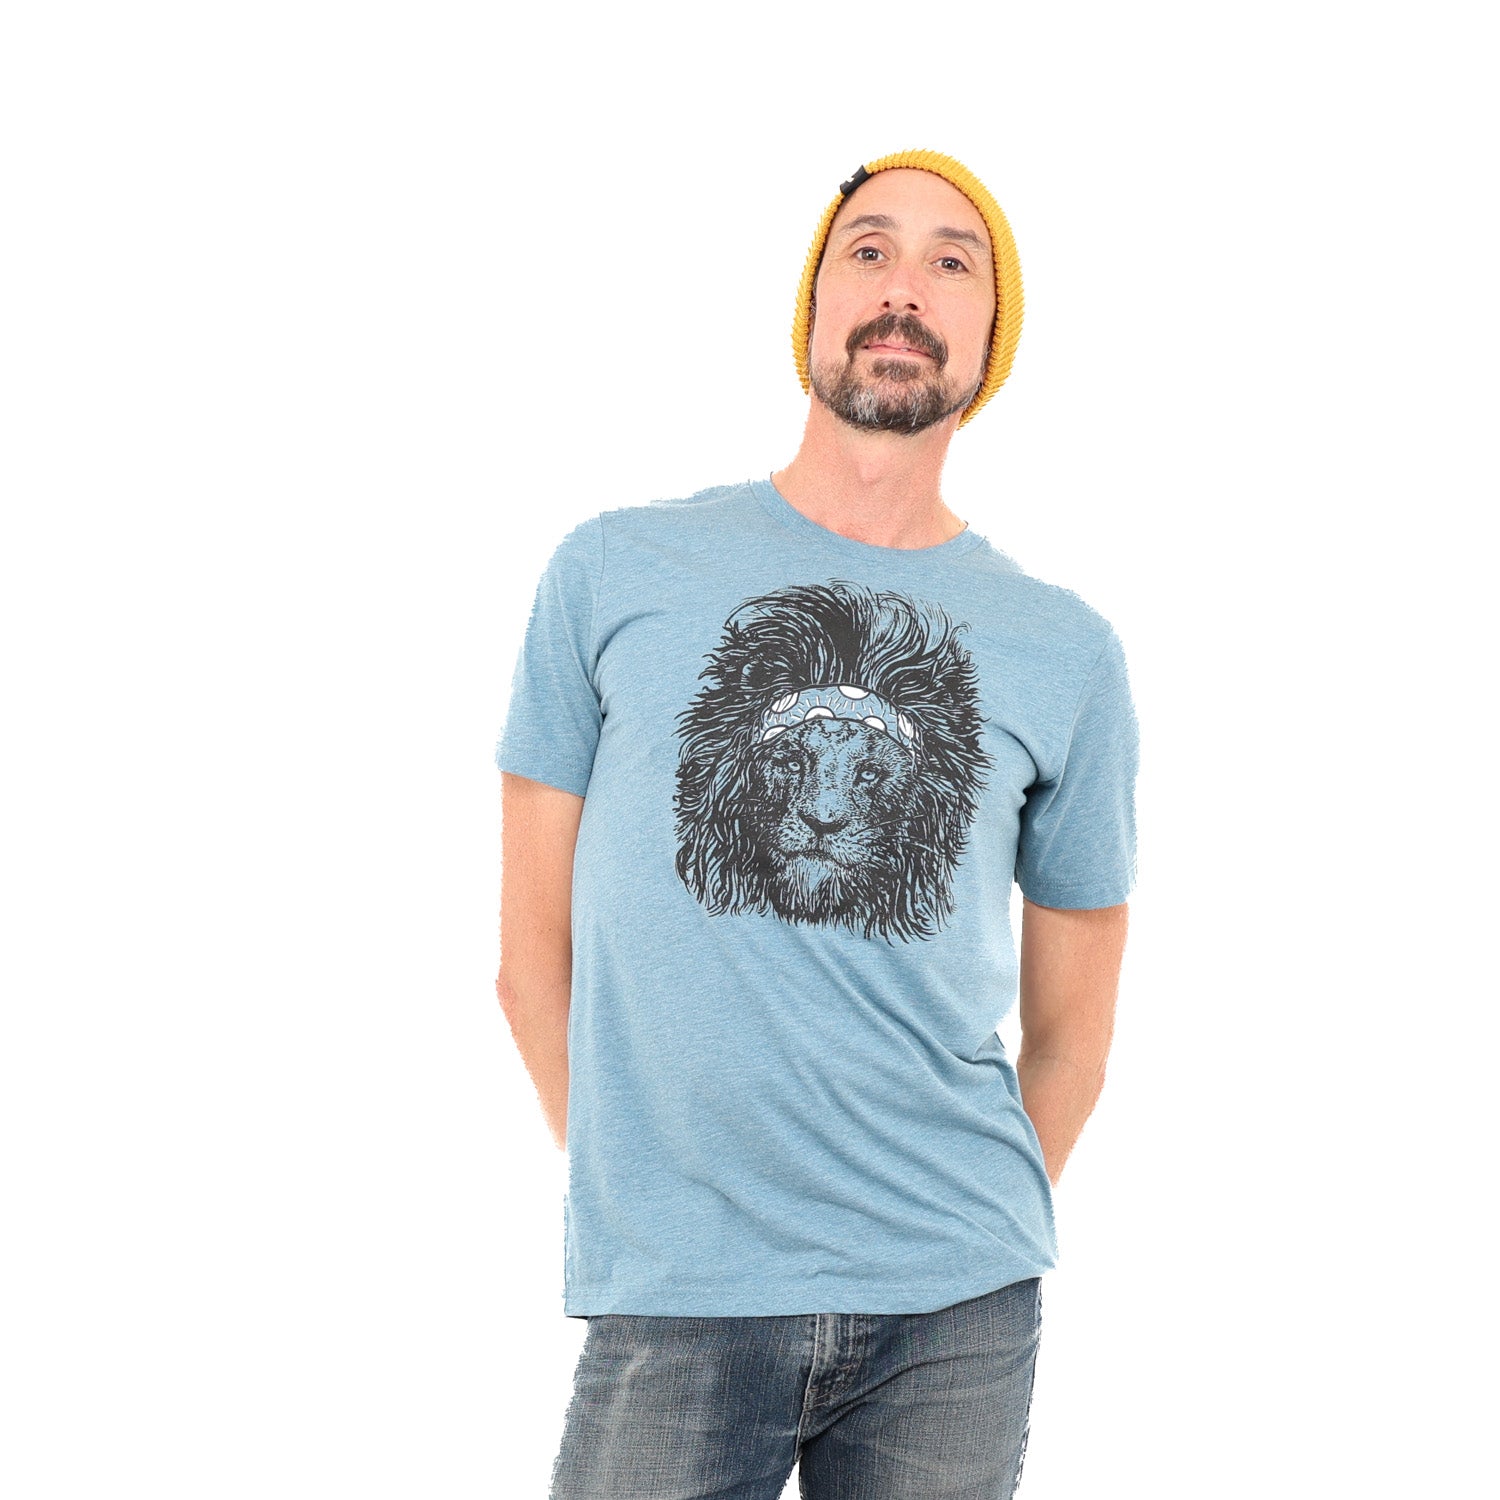 Man is wearing a steal blue tee with a screen printed lion wearing a headband on it.